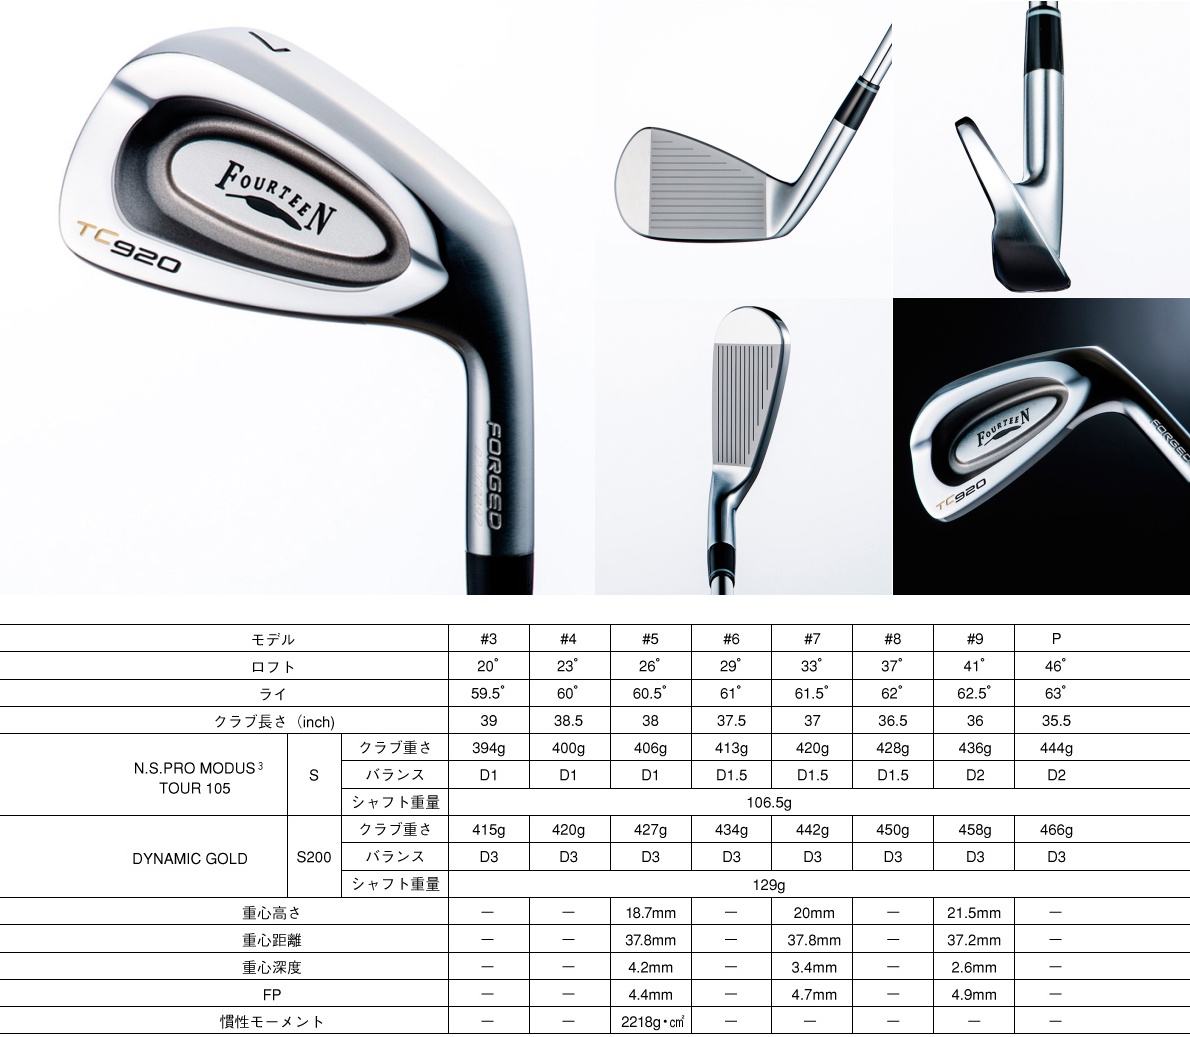 Fourteen TC920 Forged Irons